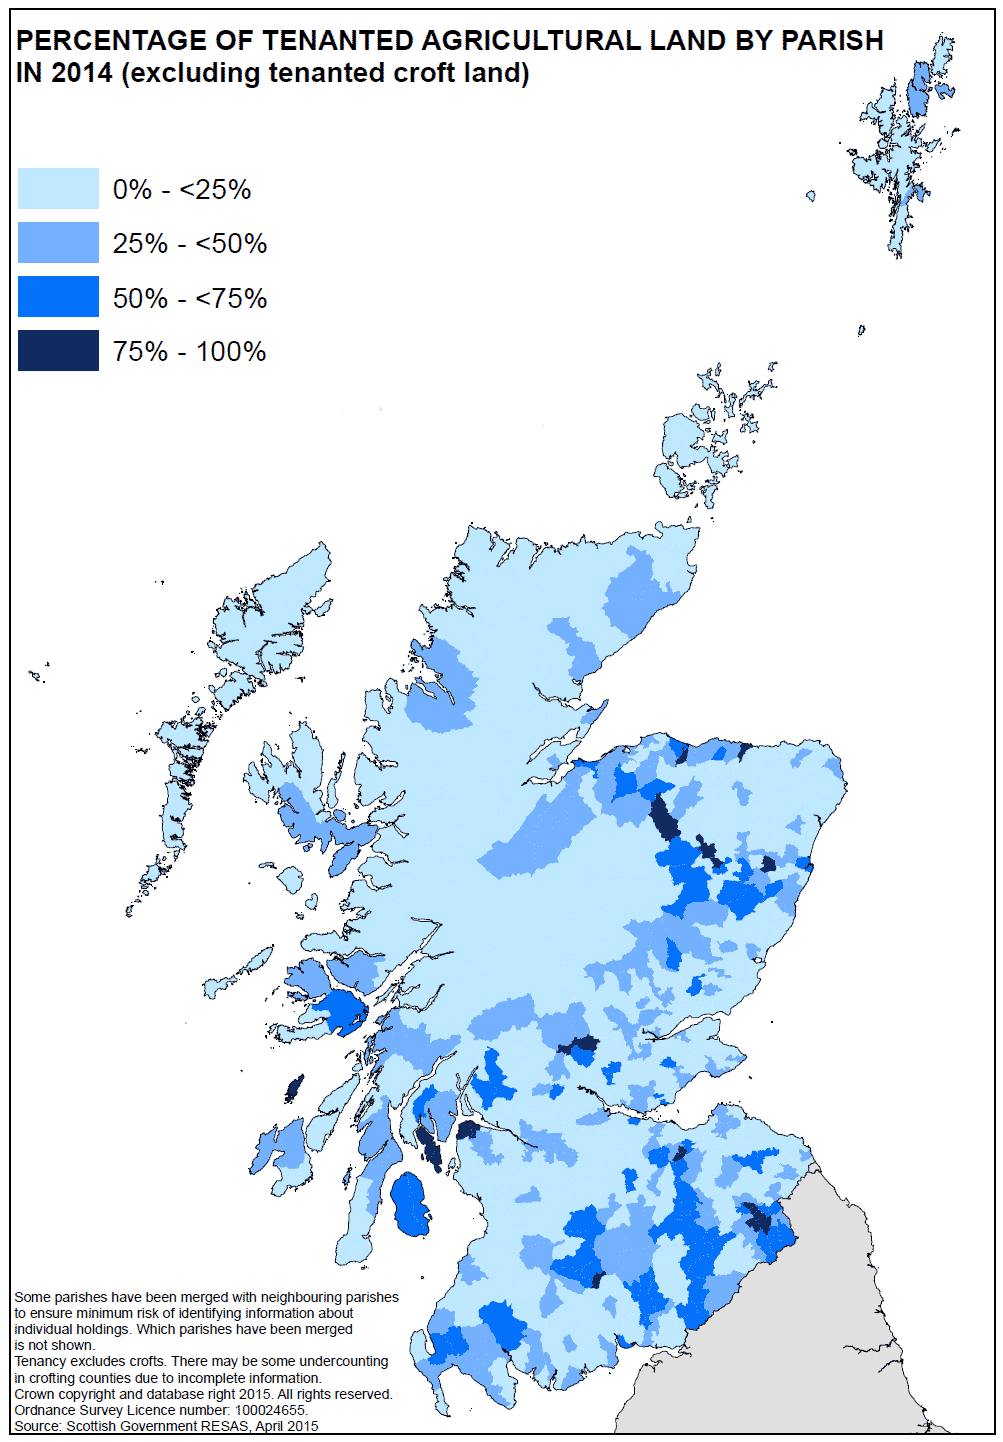 Percentage of Tenanted Agricultural Land By Parish In 2014